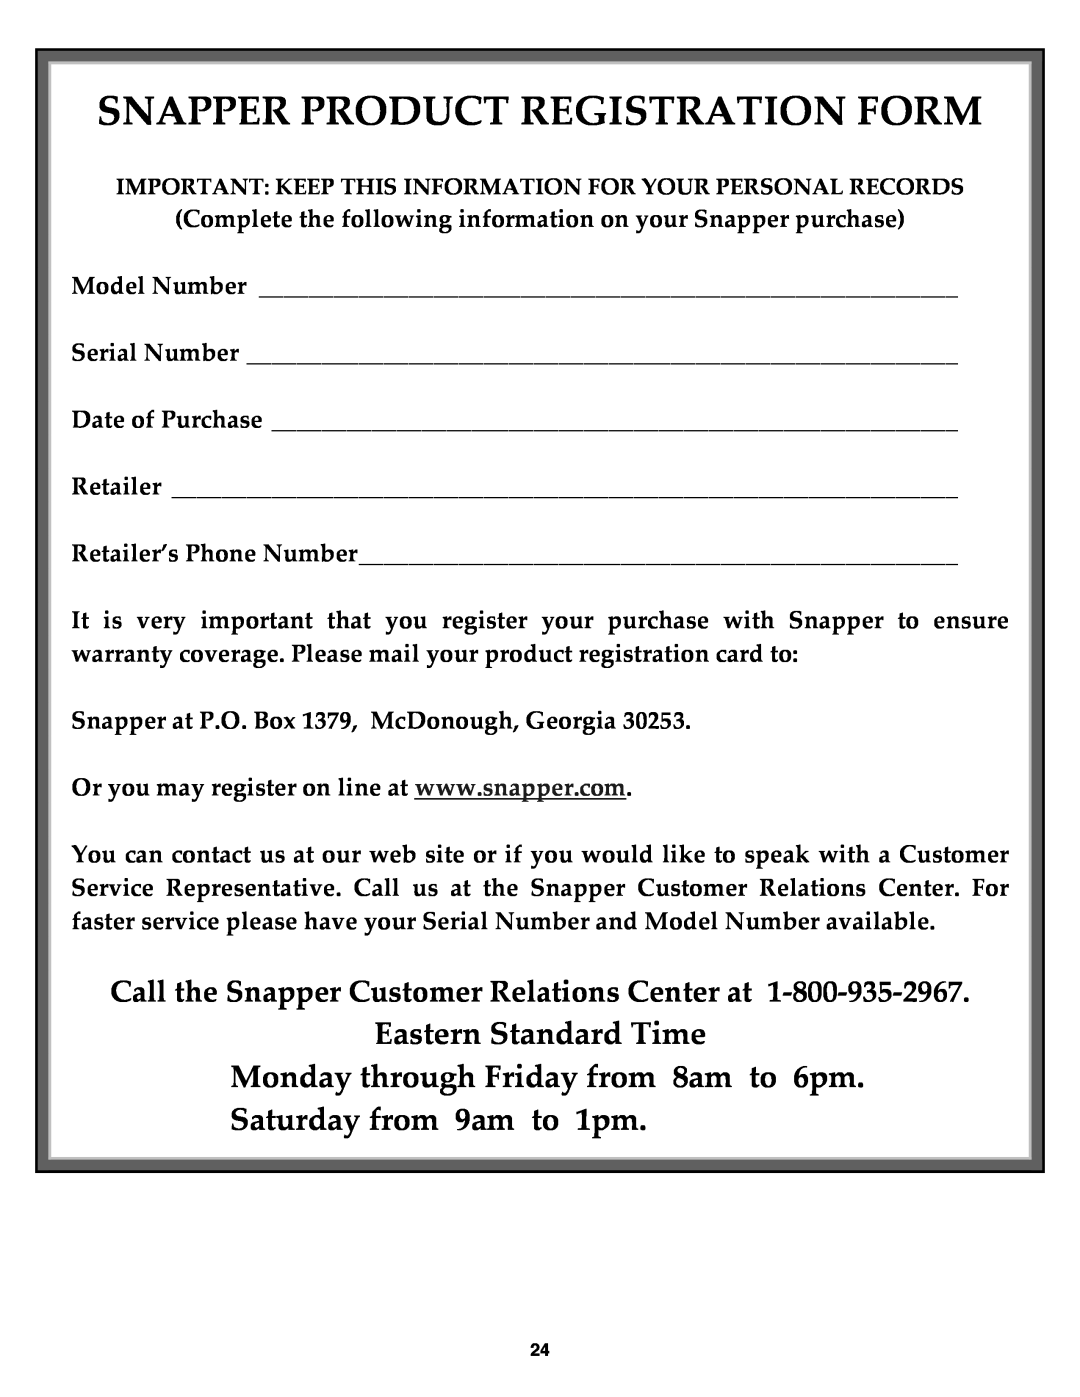 Snapper MR216017B Snapper Product Registration Form, Eastern Standard Time Monday through Friday from 8am to 6pm 